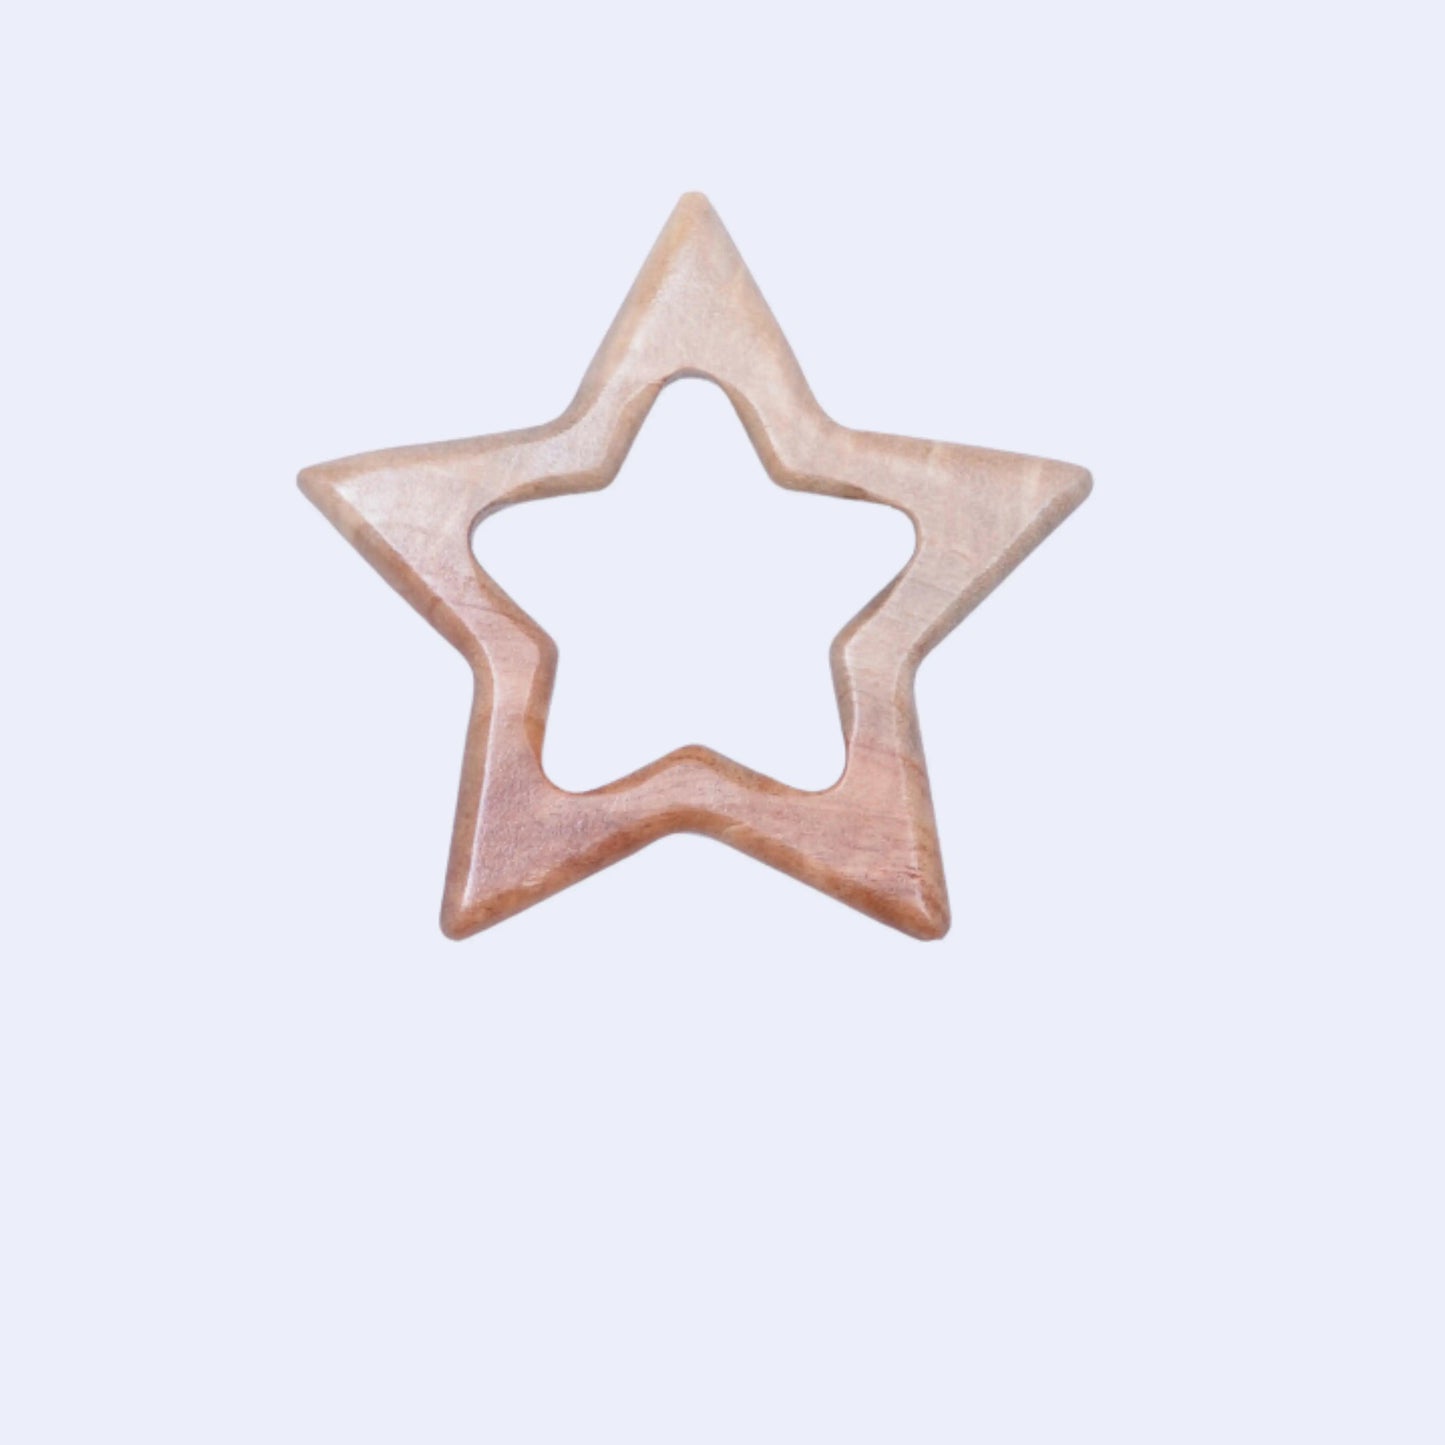 A neem wood star-shaped teether designed for infants, displayed on a white background